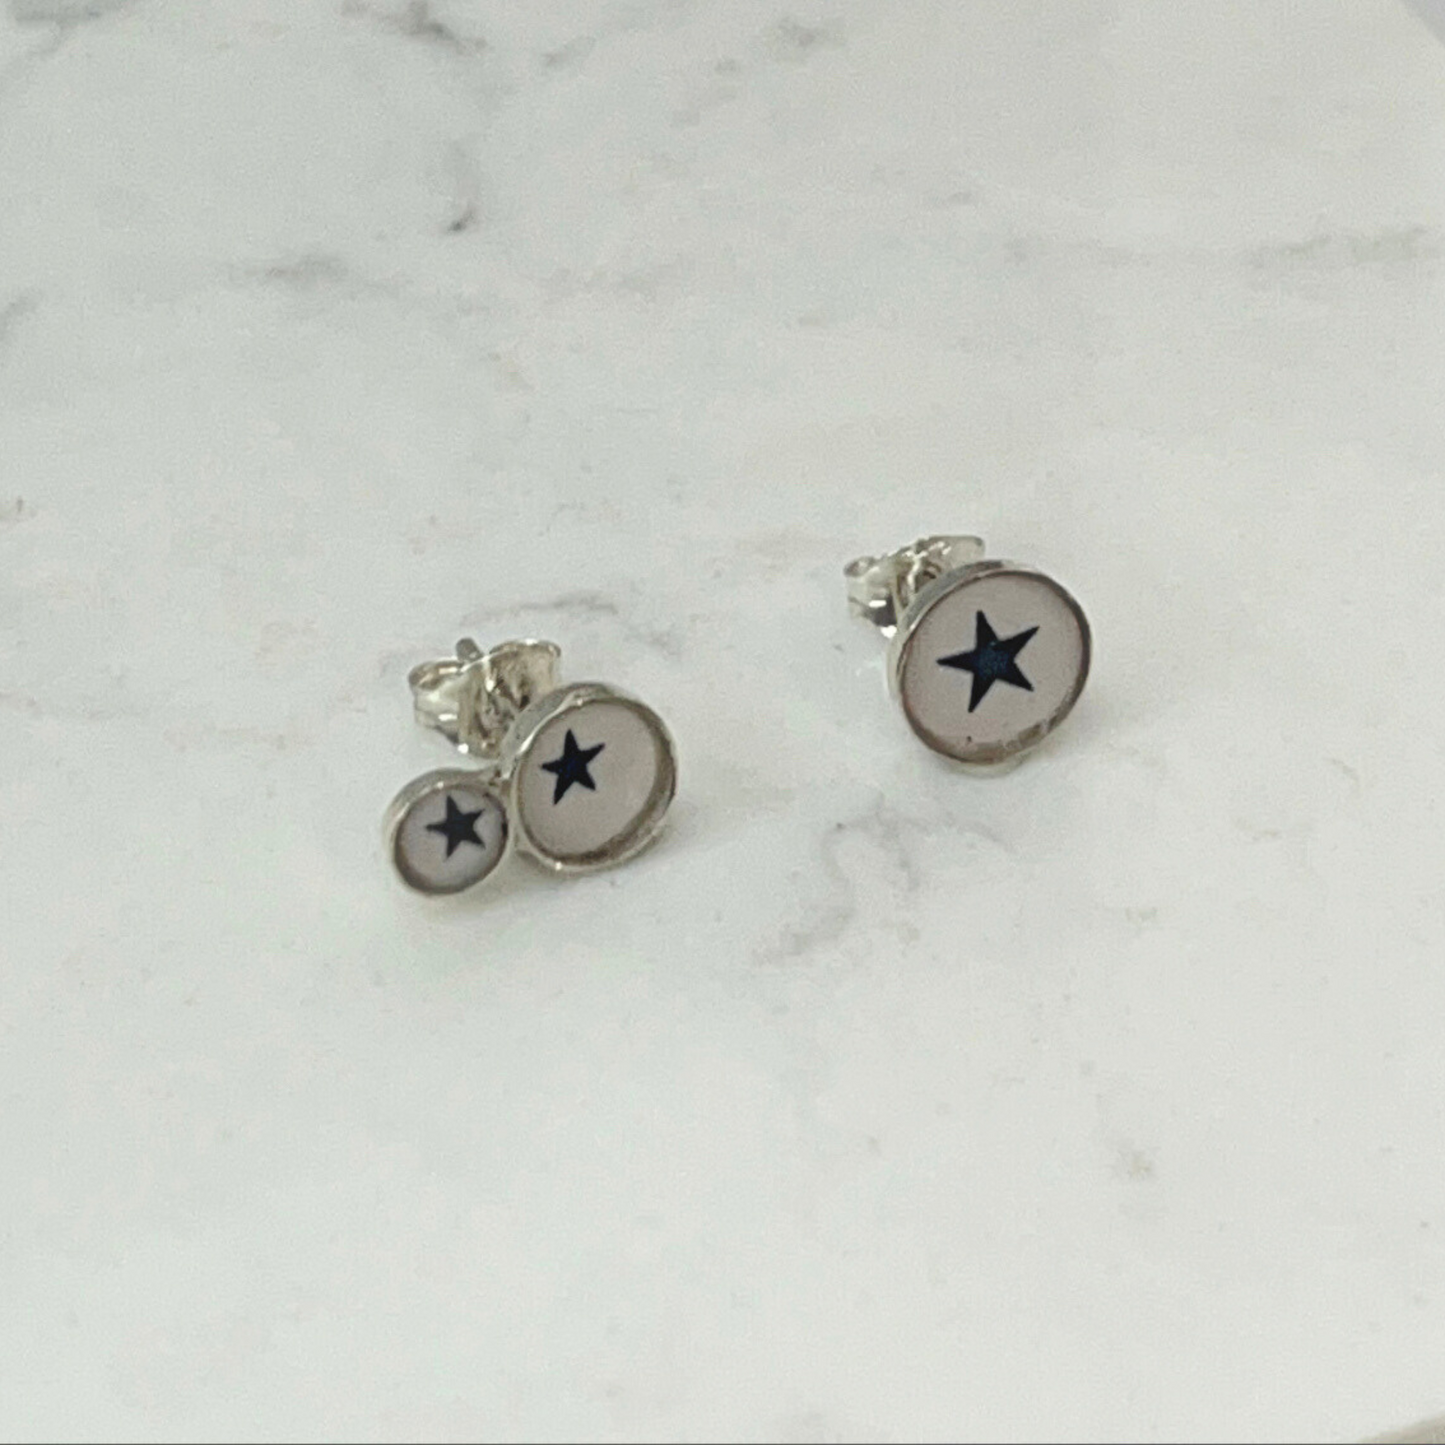 CLARE COLLINSON - Offset Sterling Silver Studs - Stars